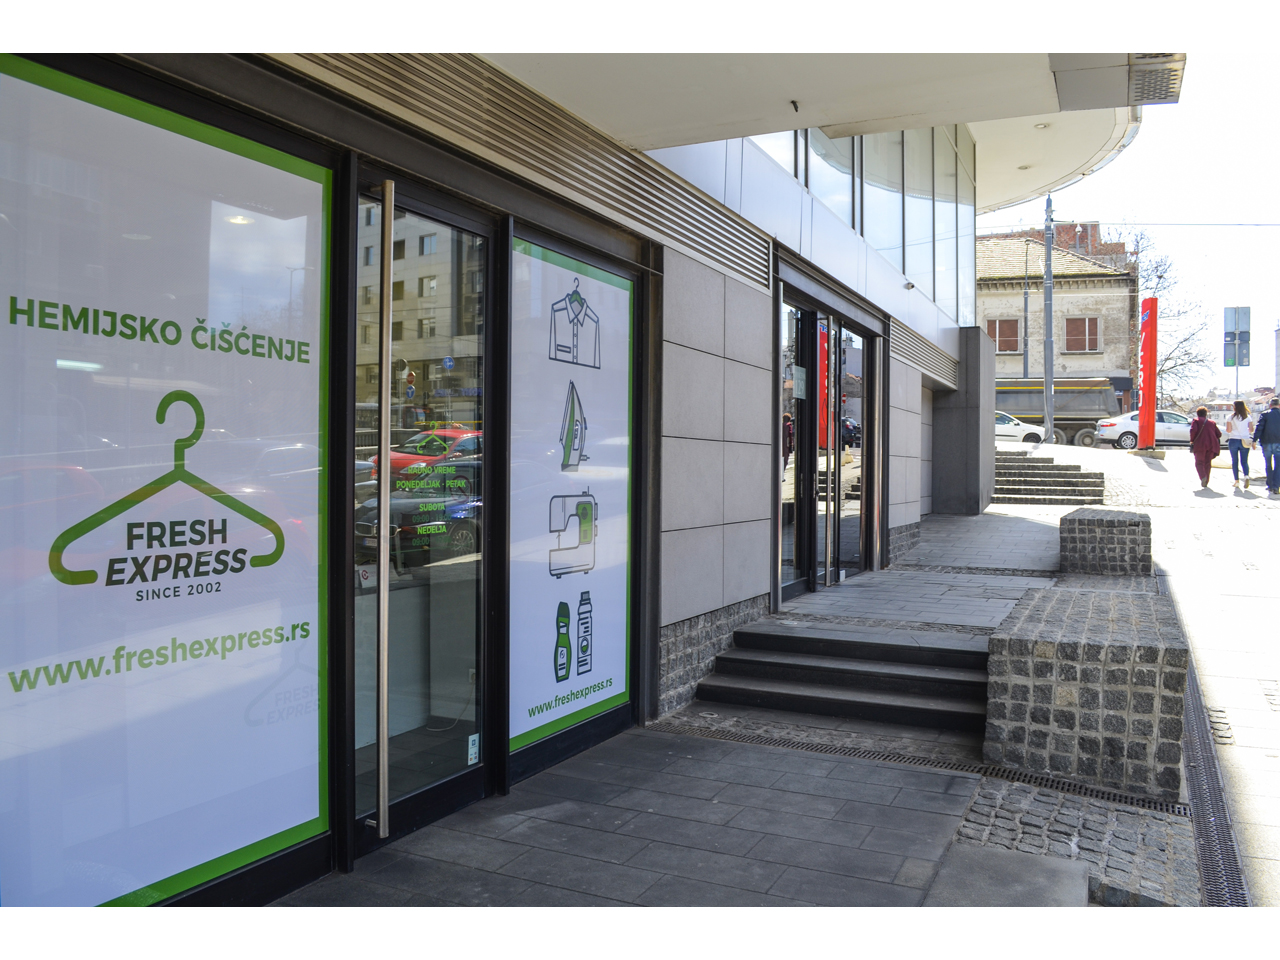 FRESH EXPRESS DRY CLEANING Laundries Beograd